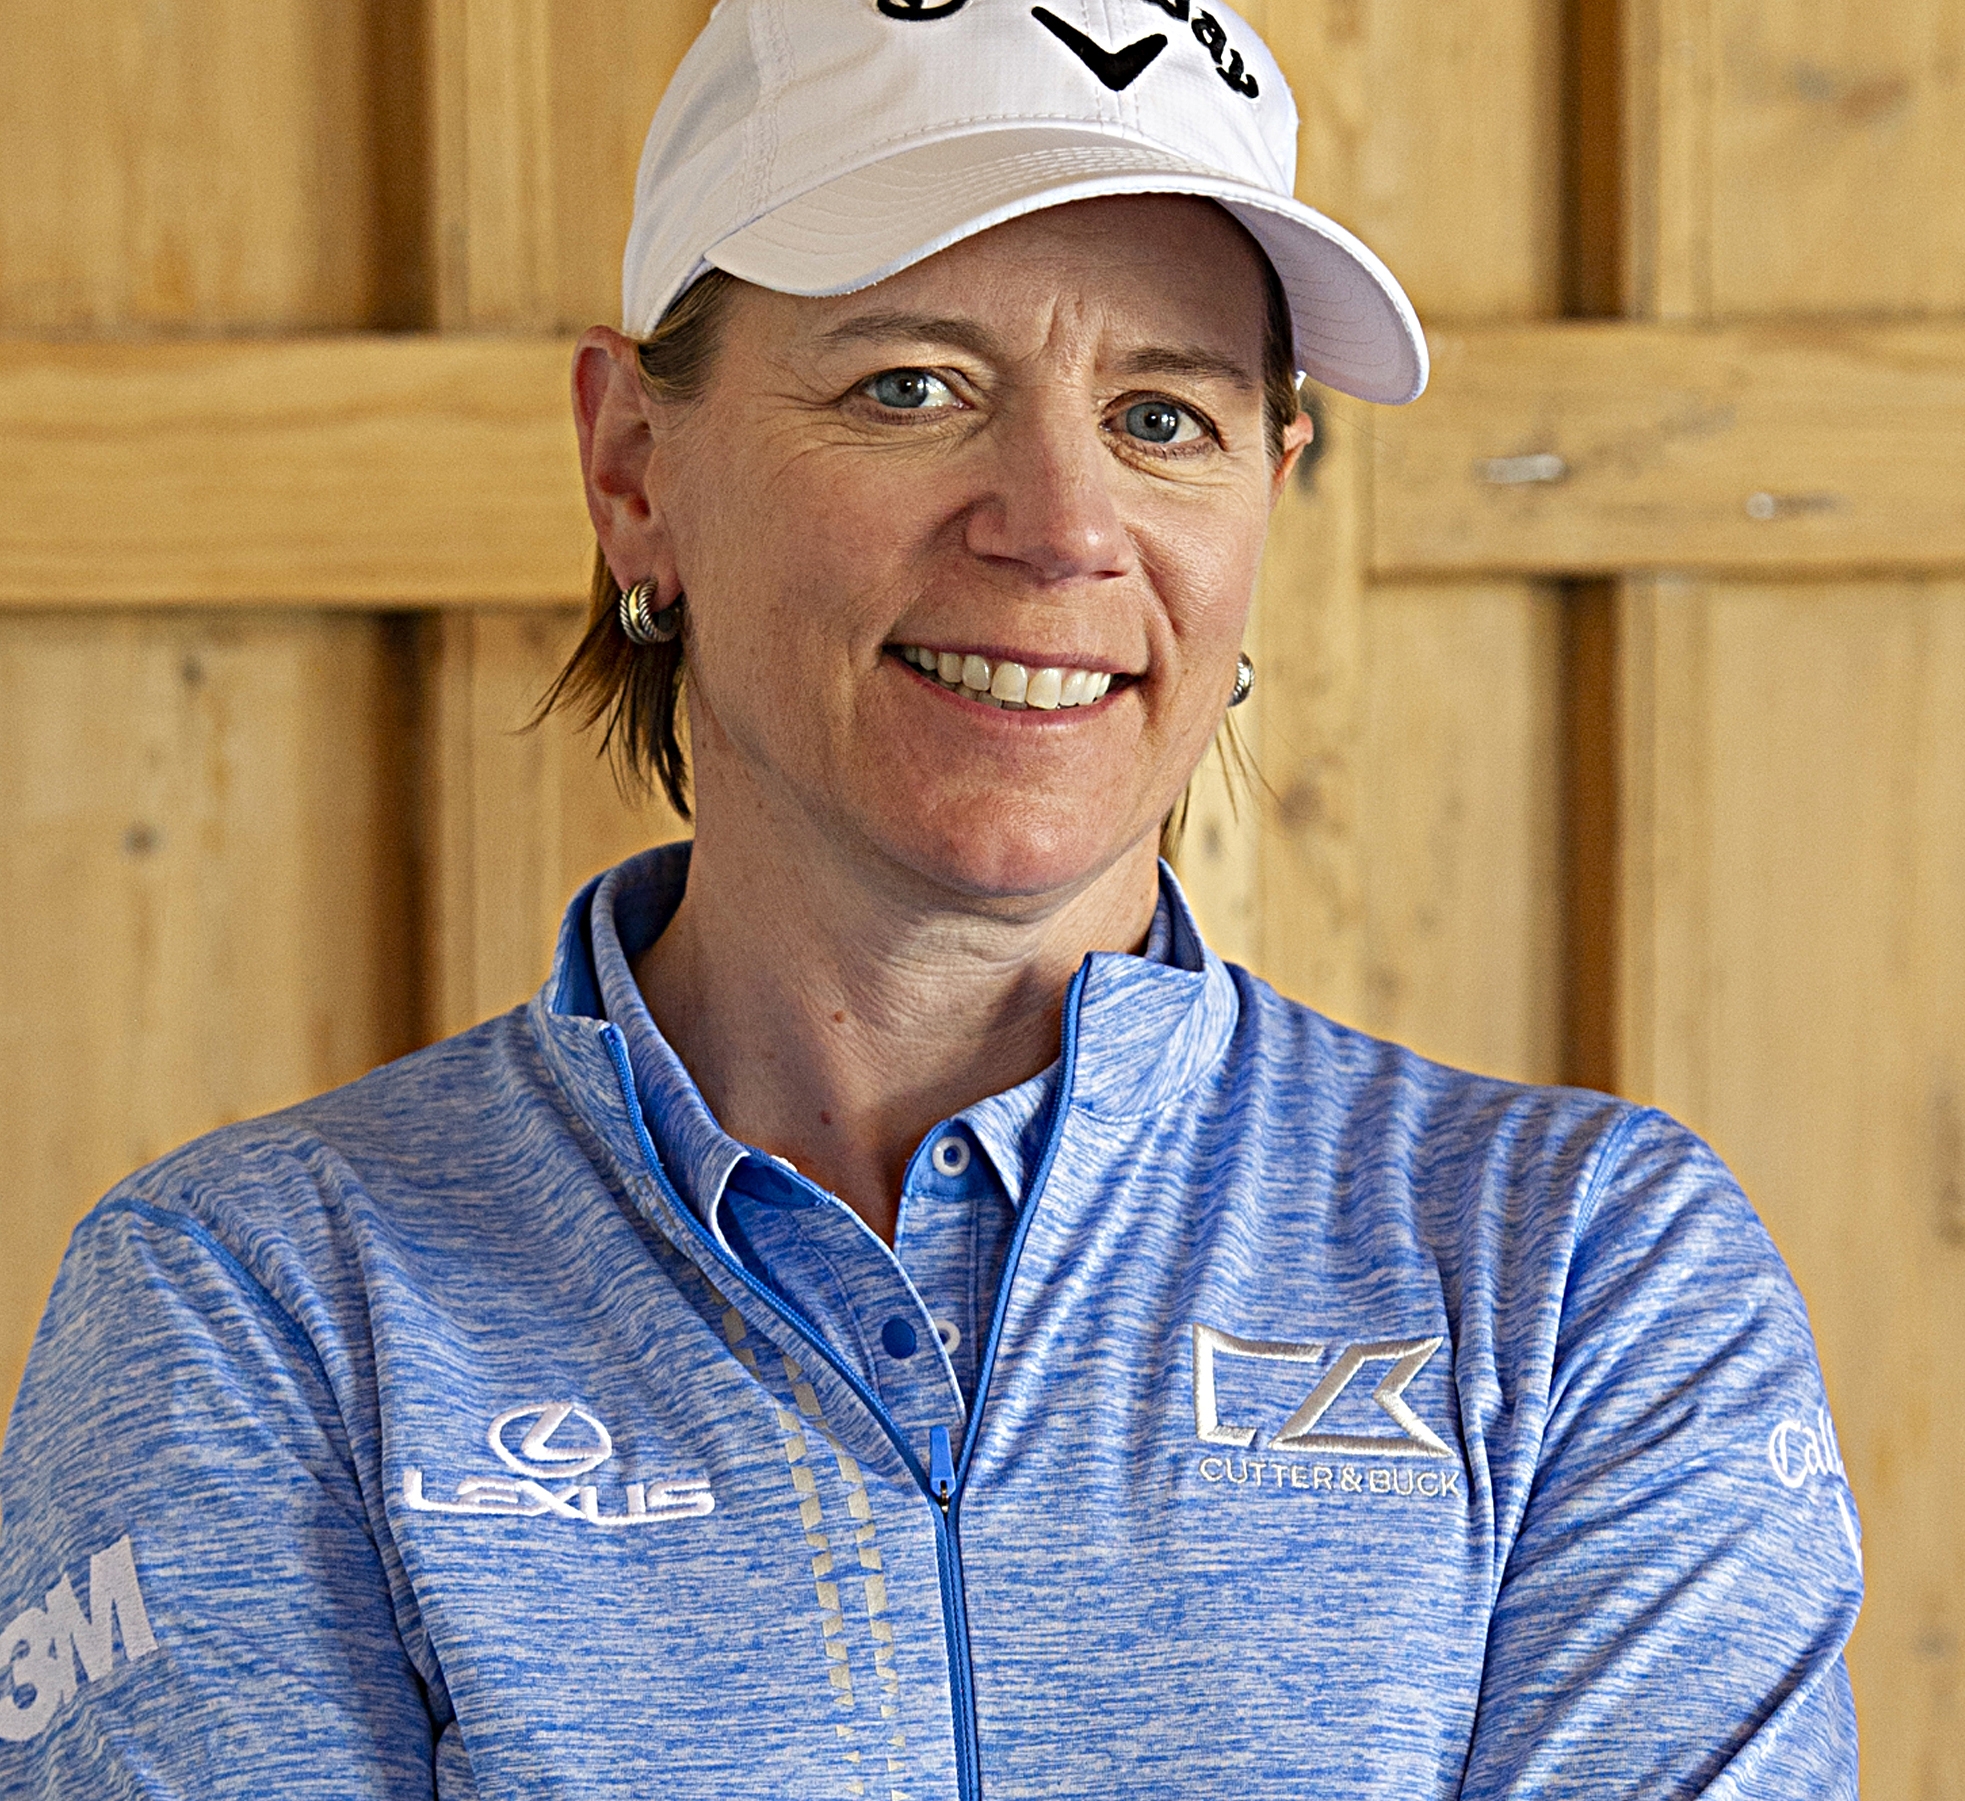 Annika Sorenstam. “I set up my foundation to give golf back what it gave to me”